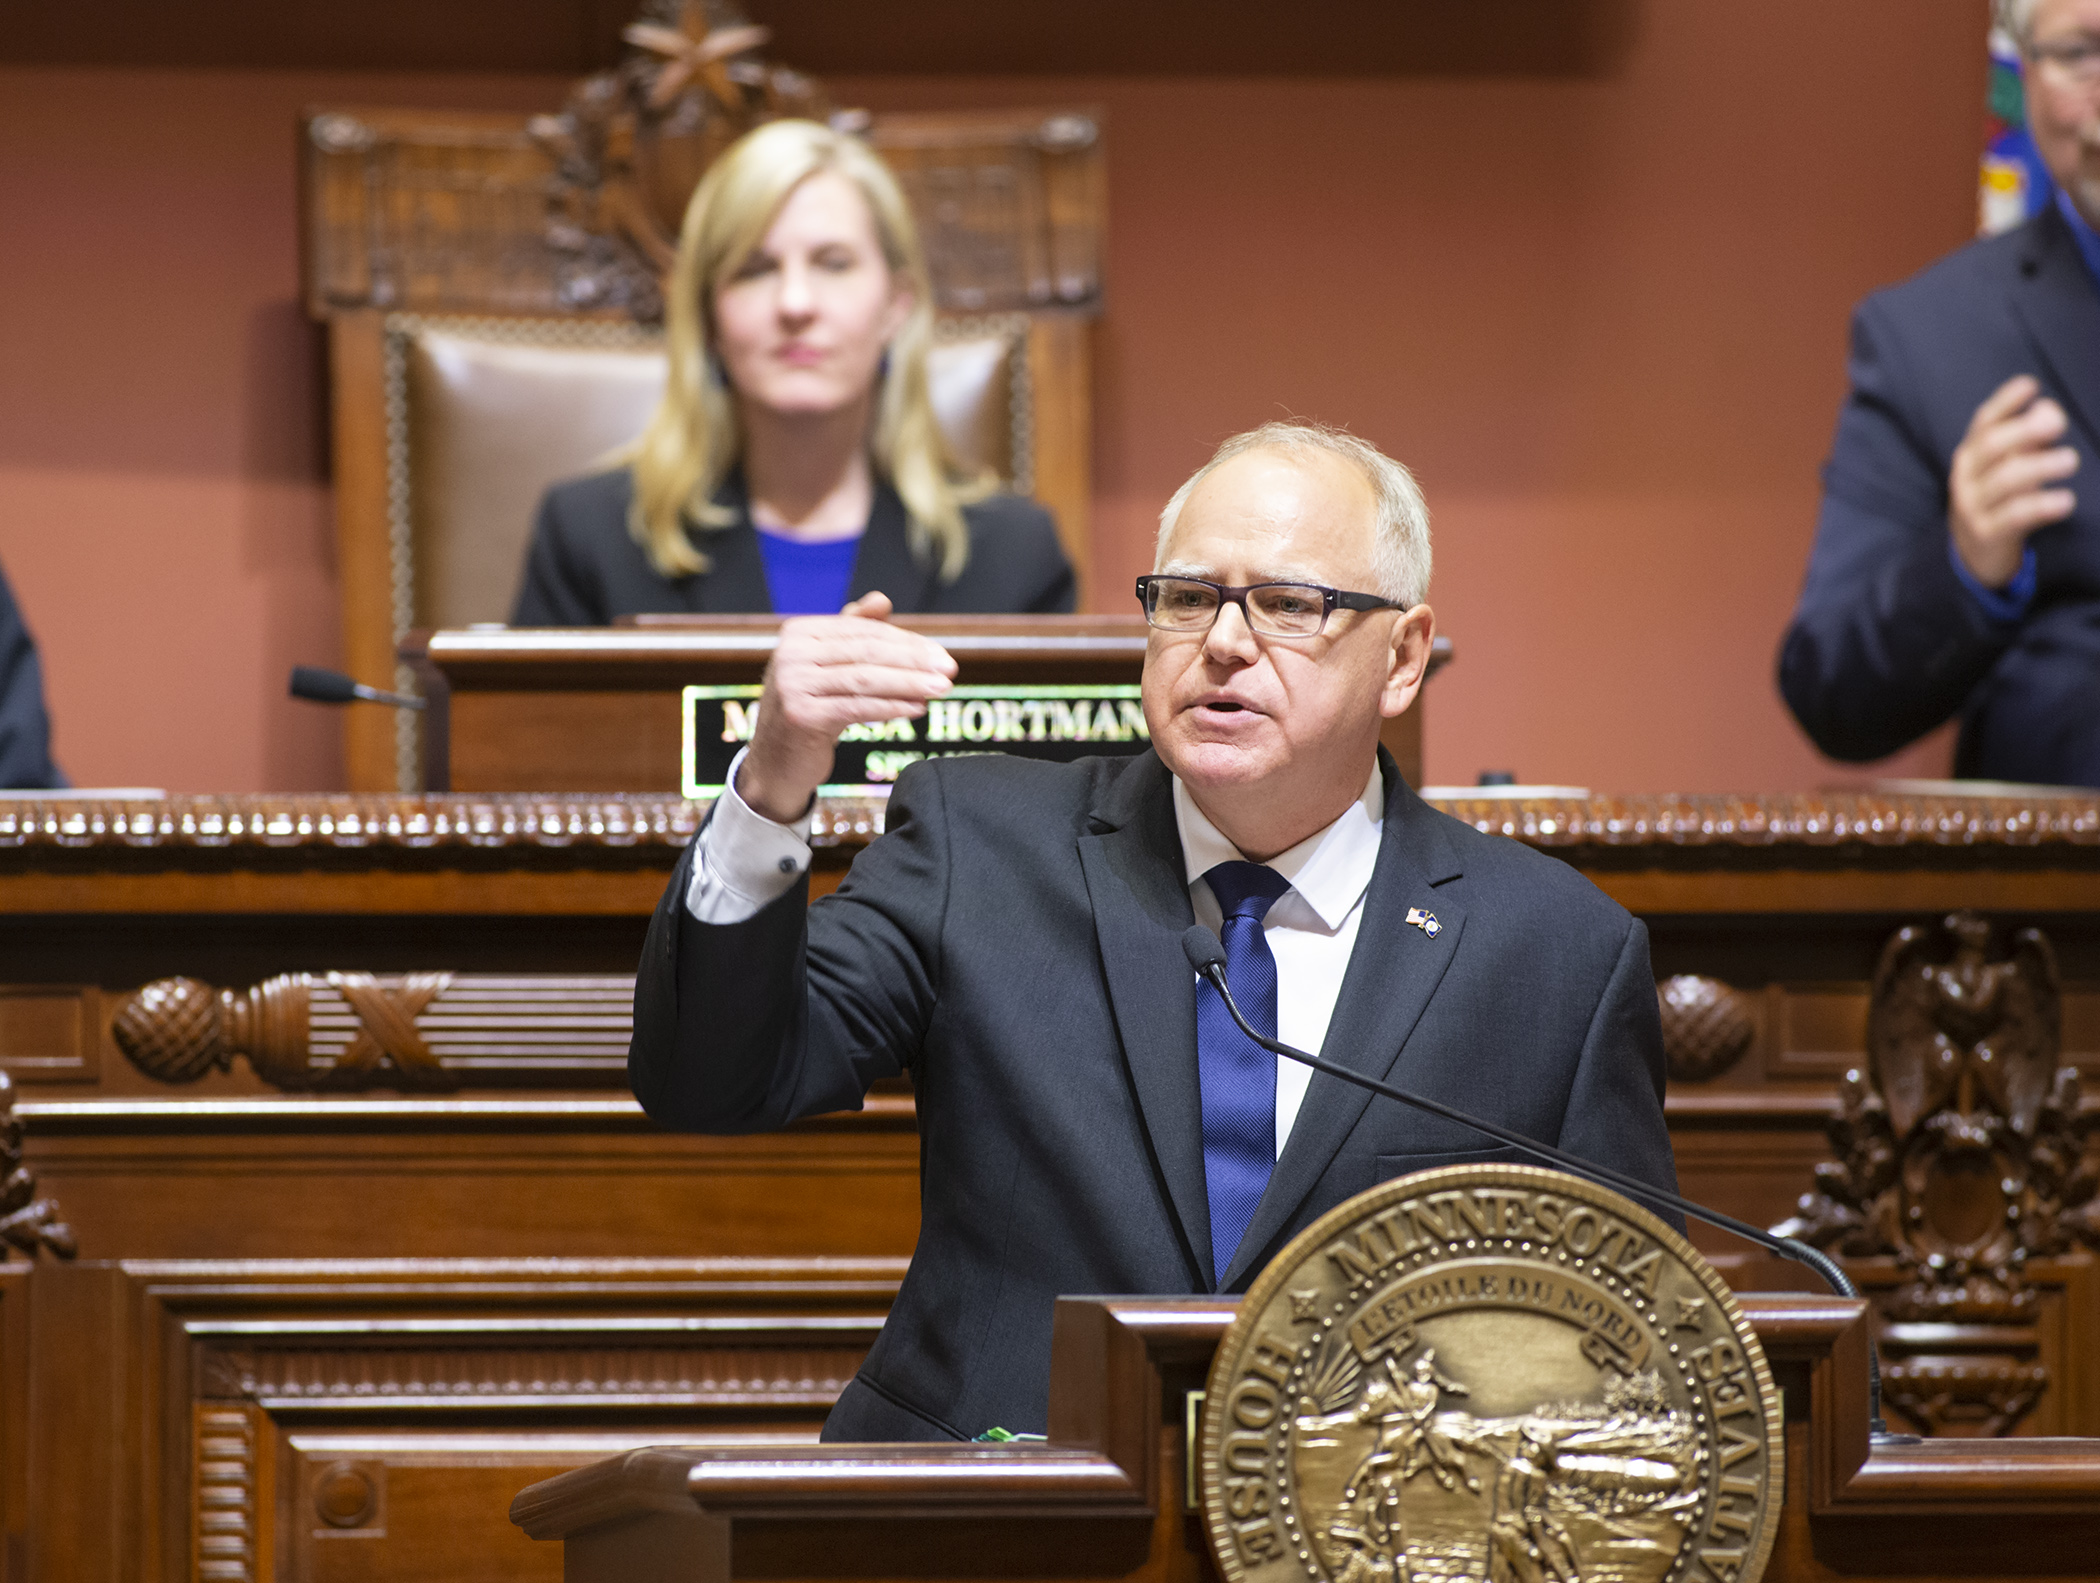 Gov. Tim Walz tells stories of Minnesotans from across the state as he delivers his first State of the State address to a joint convention of the Legislature April 3. Photo by Paul Battaglia